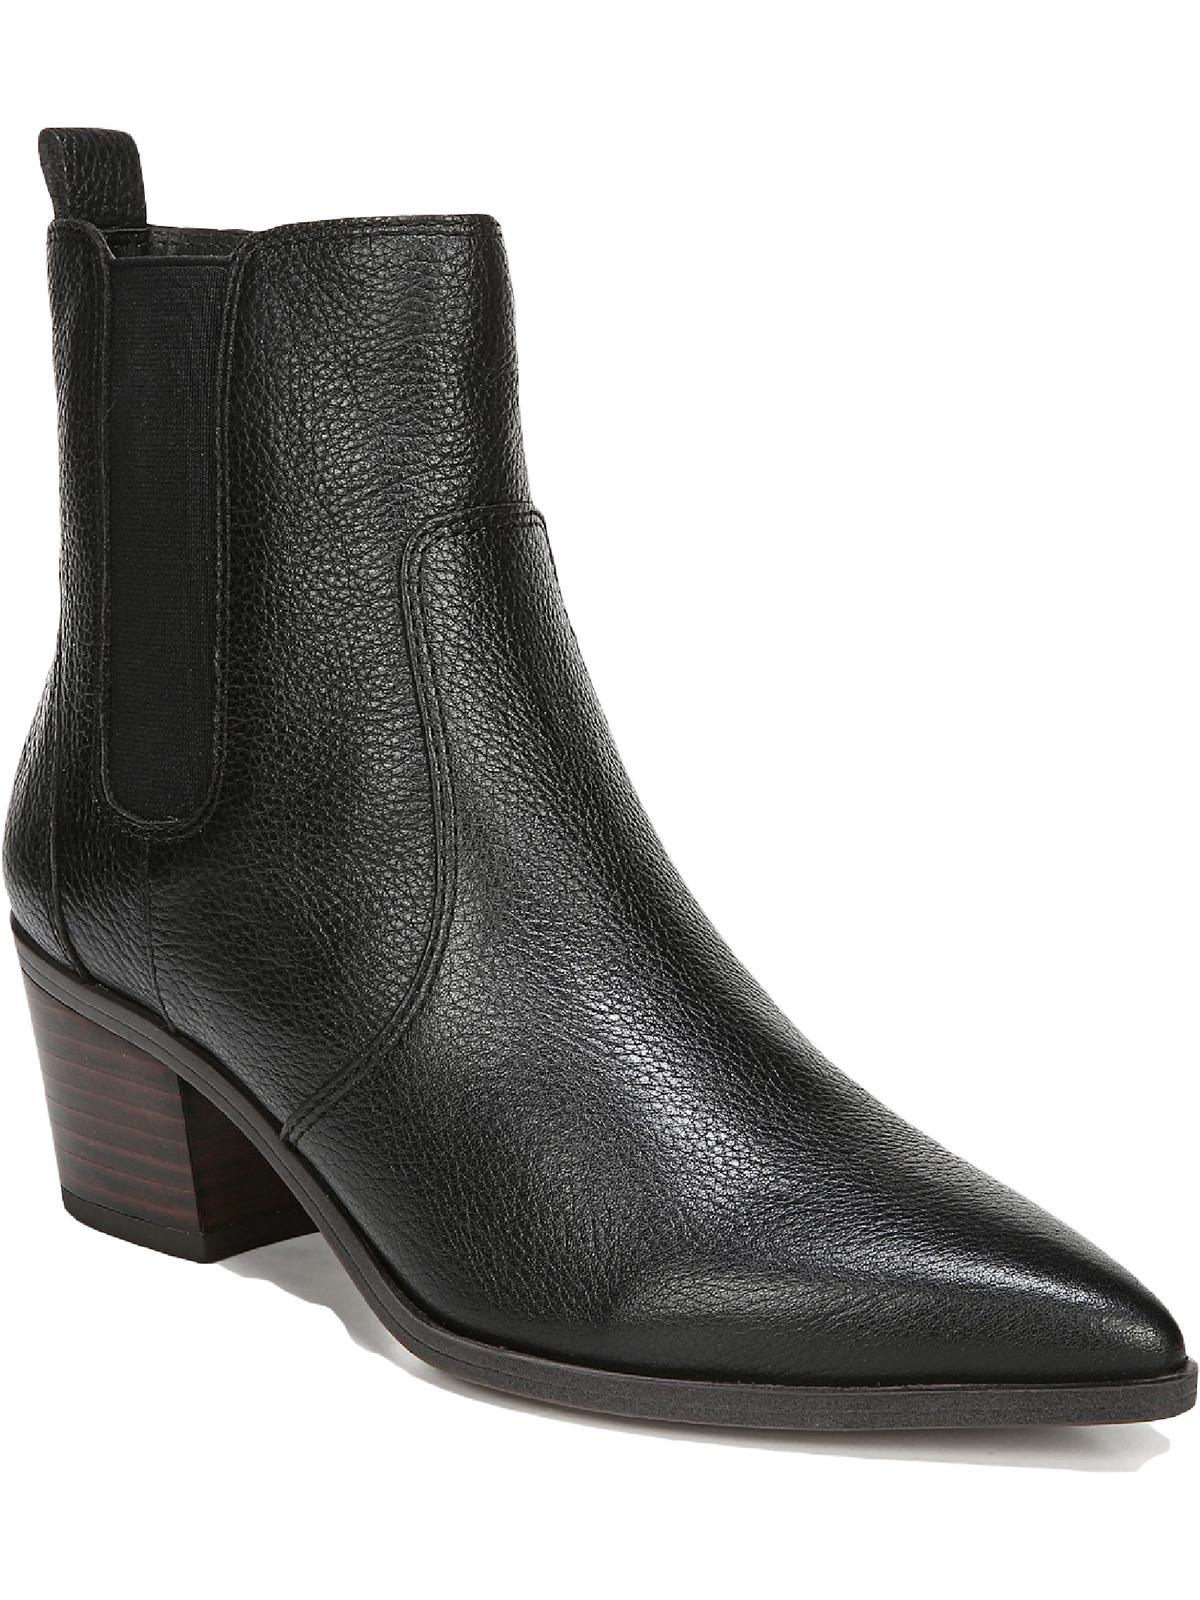 Franco Sarto Sager Leather Block Heel Ankle Boots in Black | Lyst